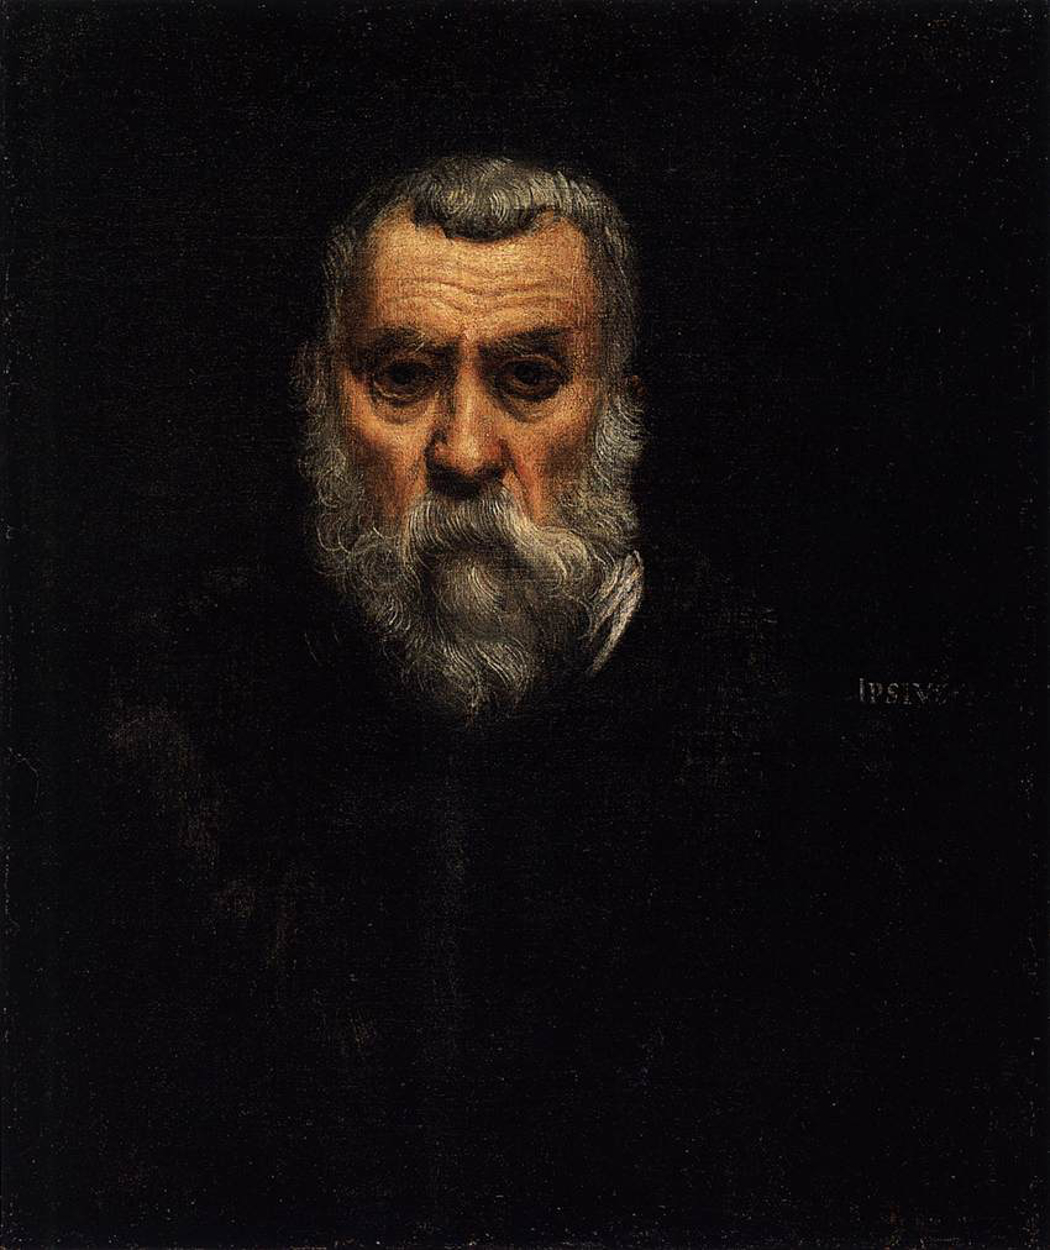 Tintoretto - 1518 - May 31, 1594